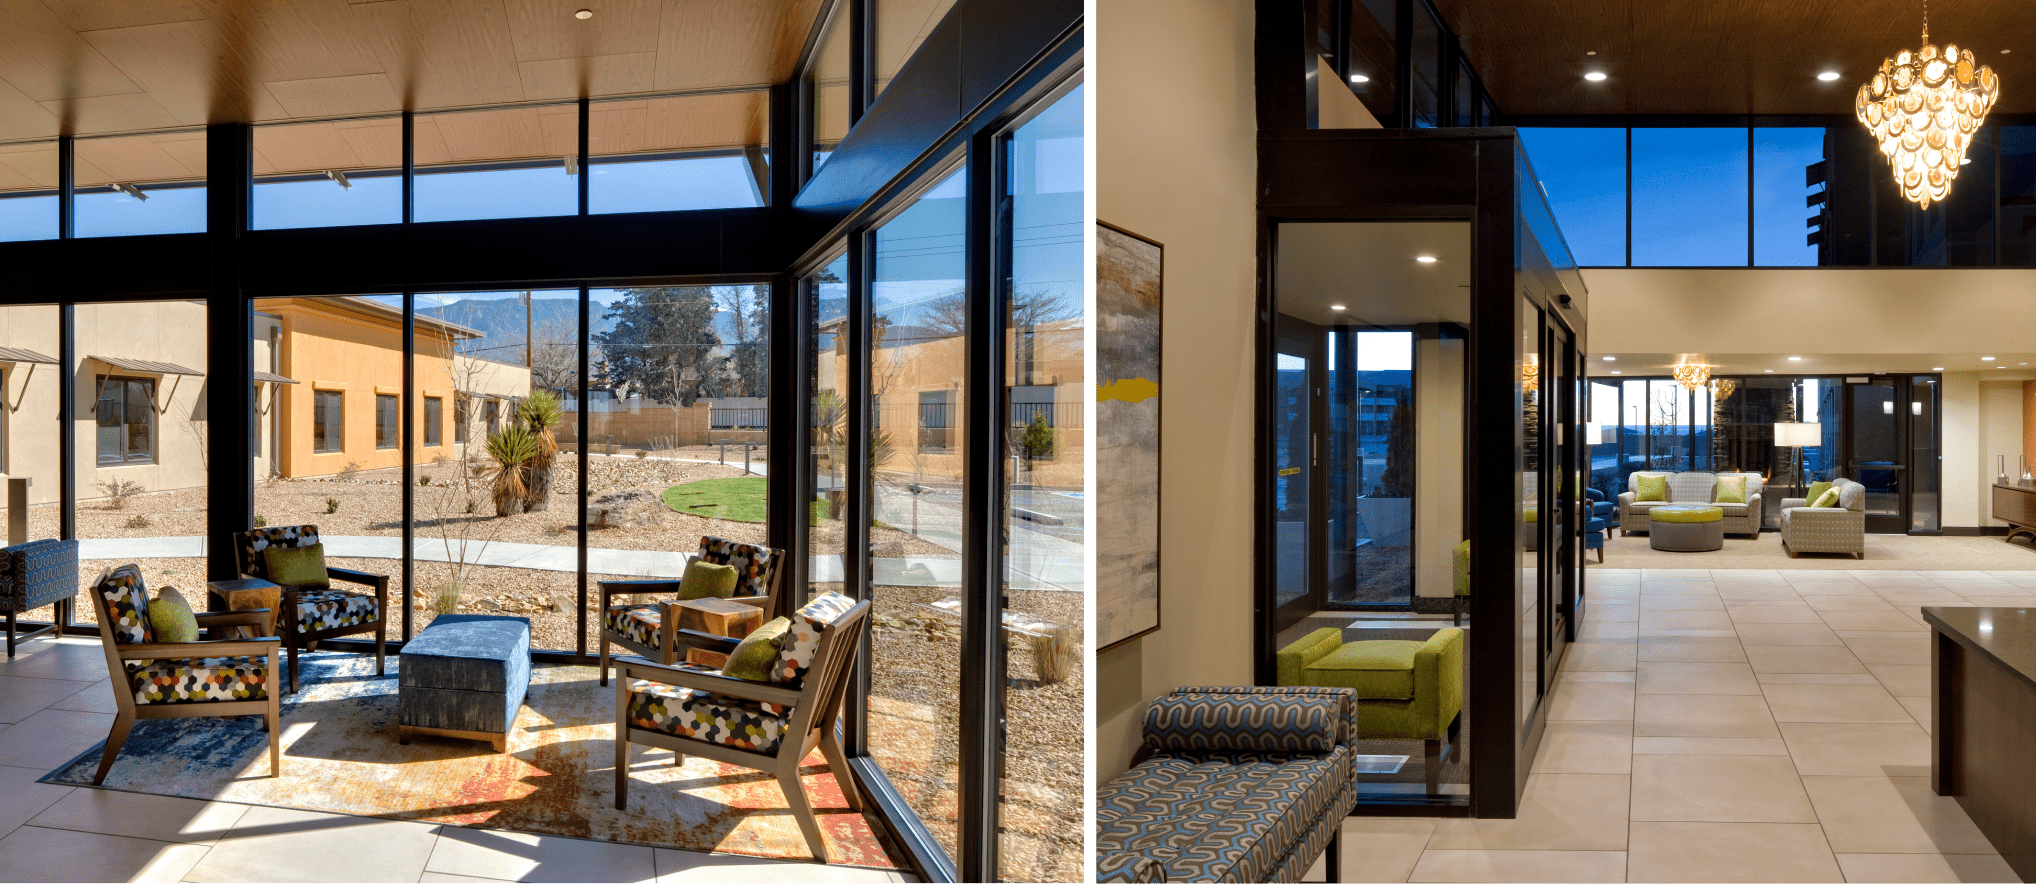 Comfortable indoor and outdoor spaces provide for small and large gatherings at The Watermark at Cherry Hills in Albuquerque.